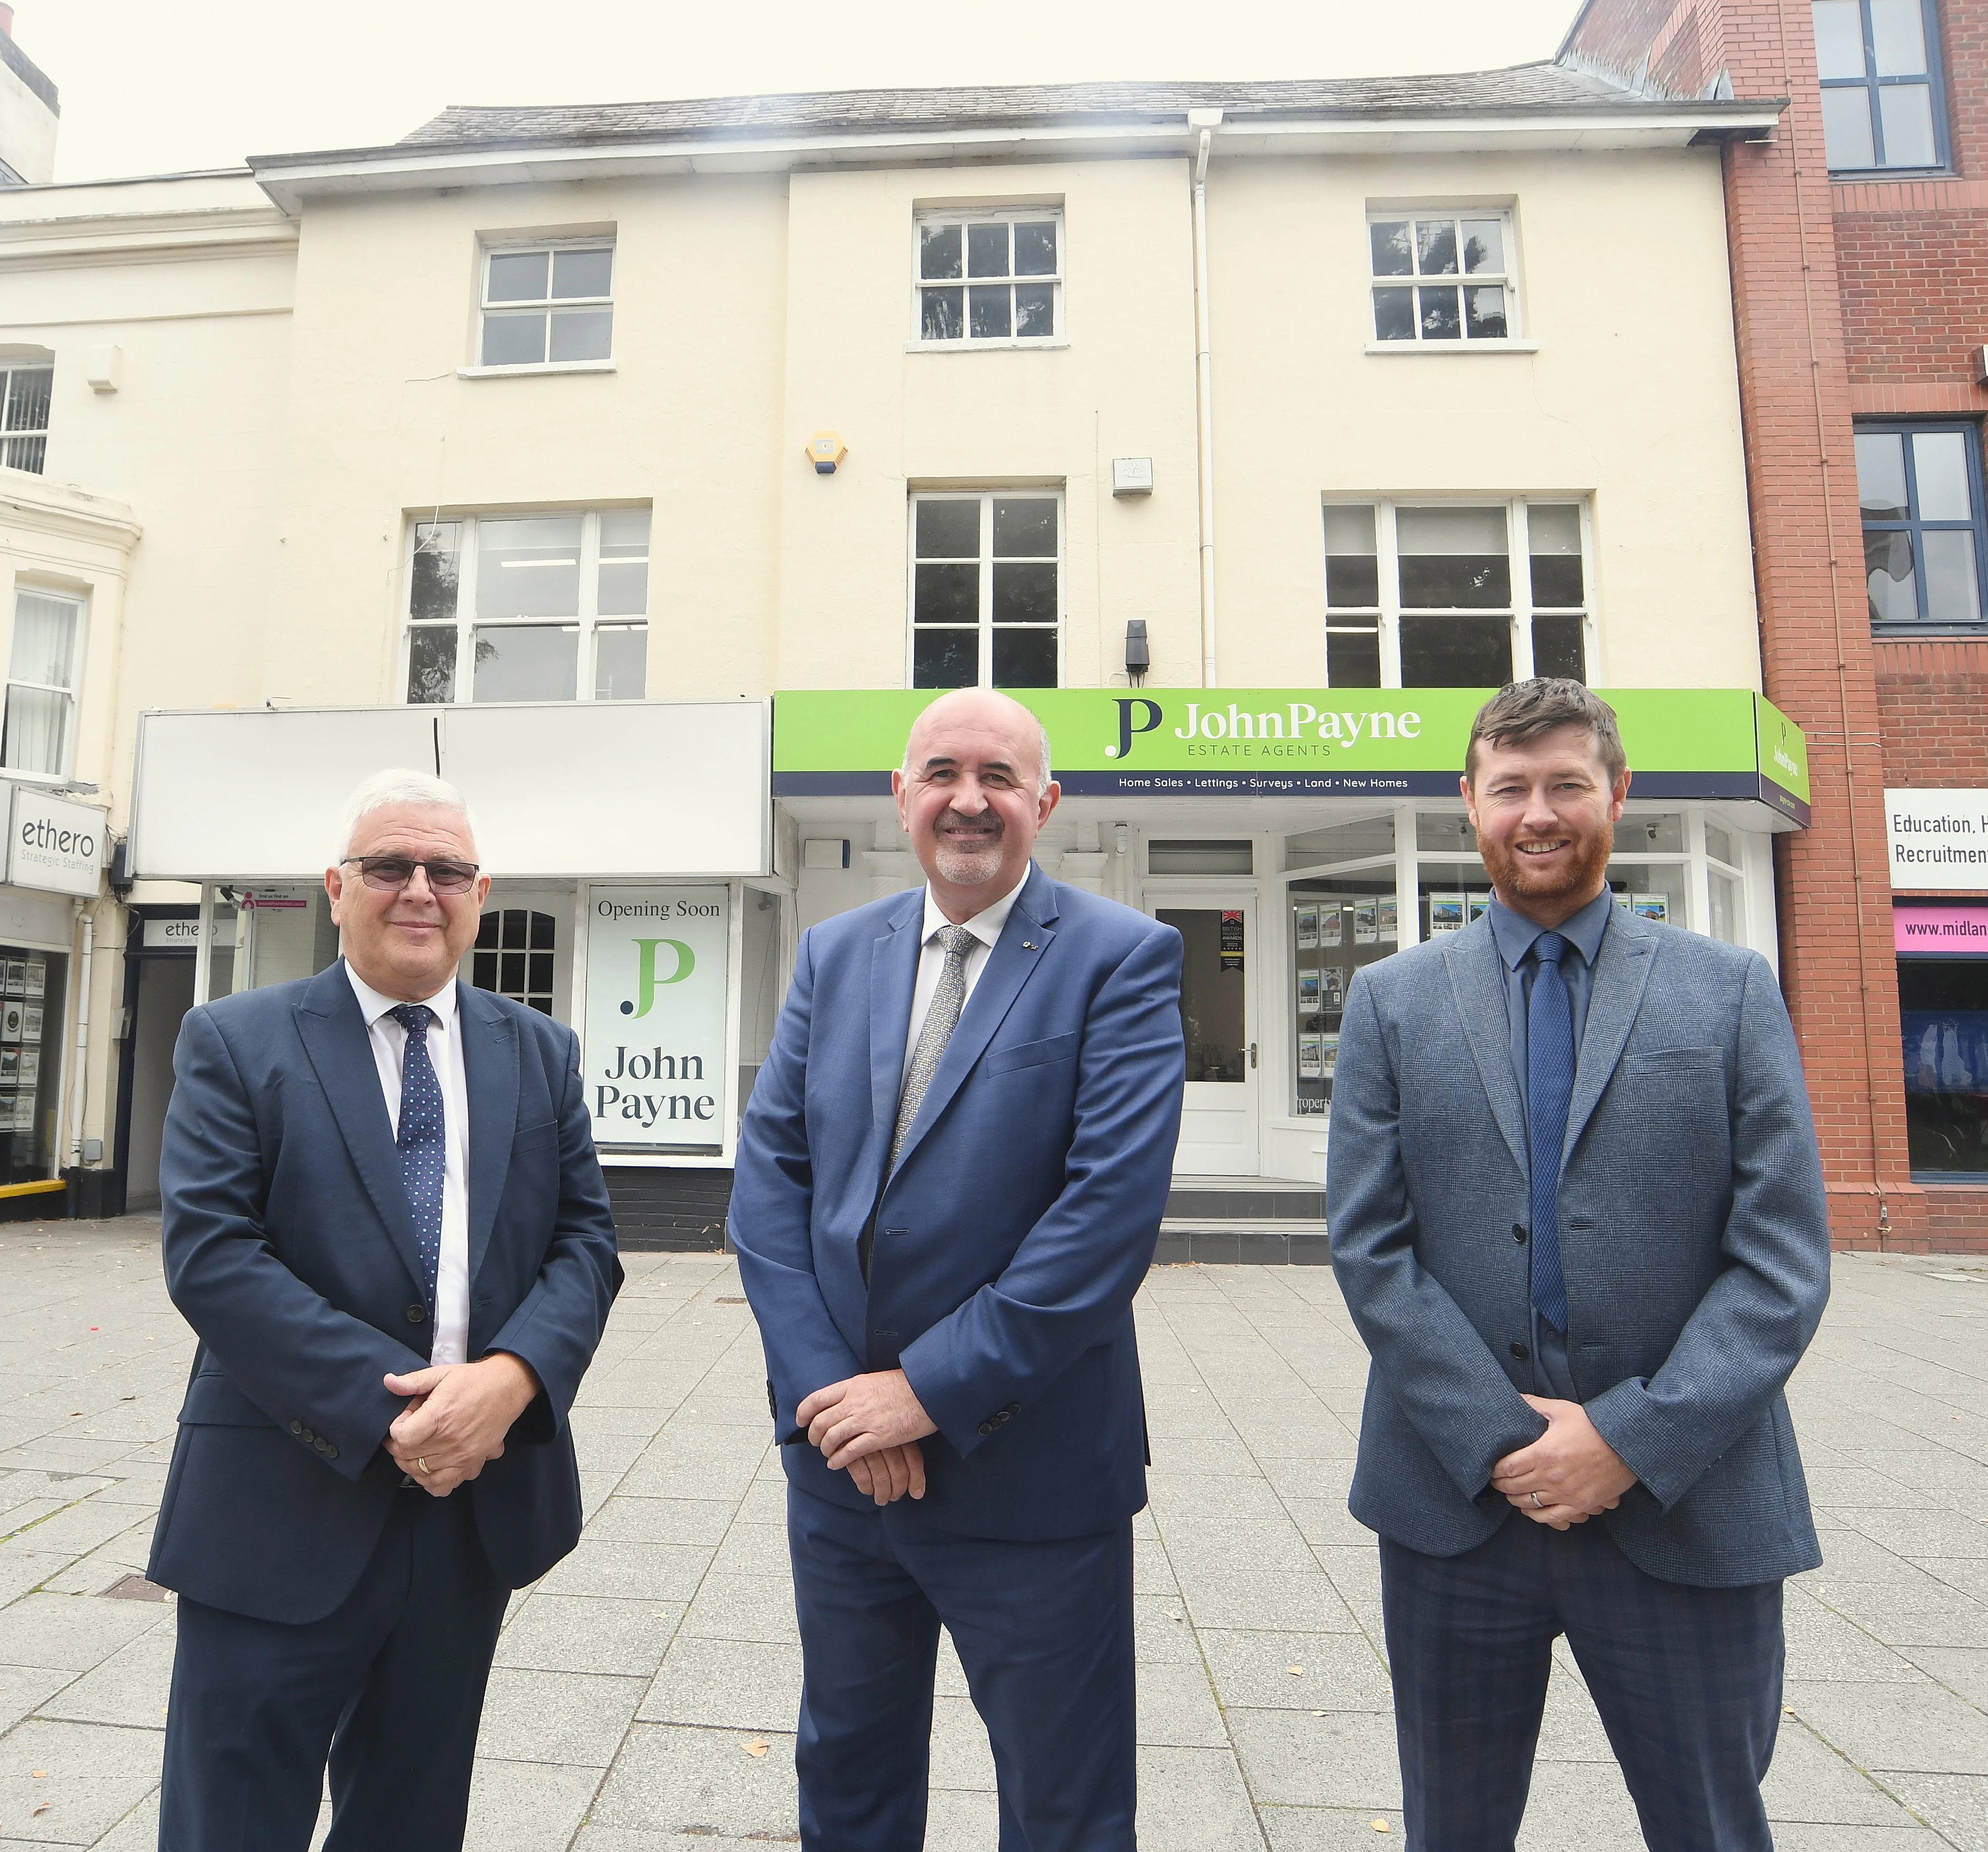 From left: Tony Twigger (Director at John Payne Estate Agents), John Payne, and Daniel Little (Director at John Payne Estate Agents) outside the new ‘super office’ at 23 Warwick Row in Coventry